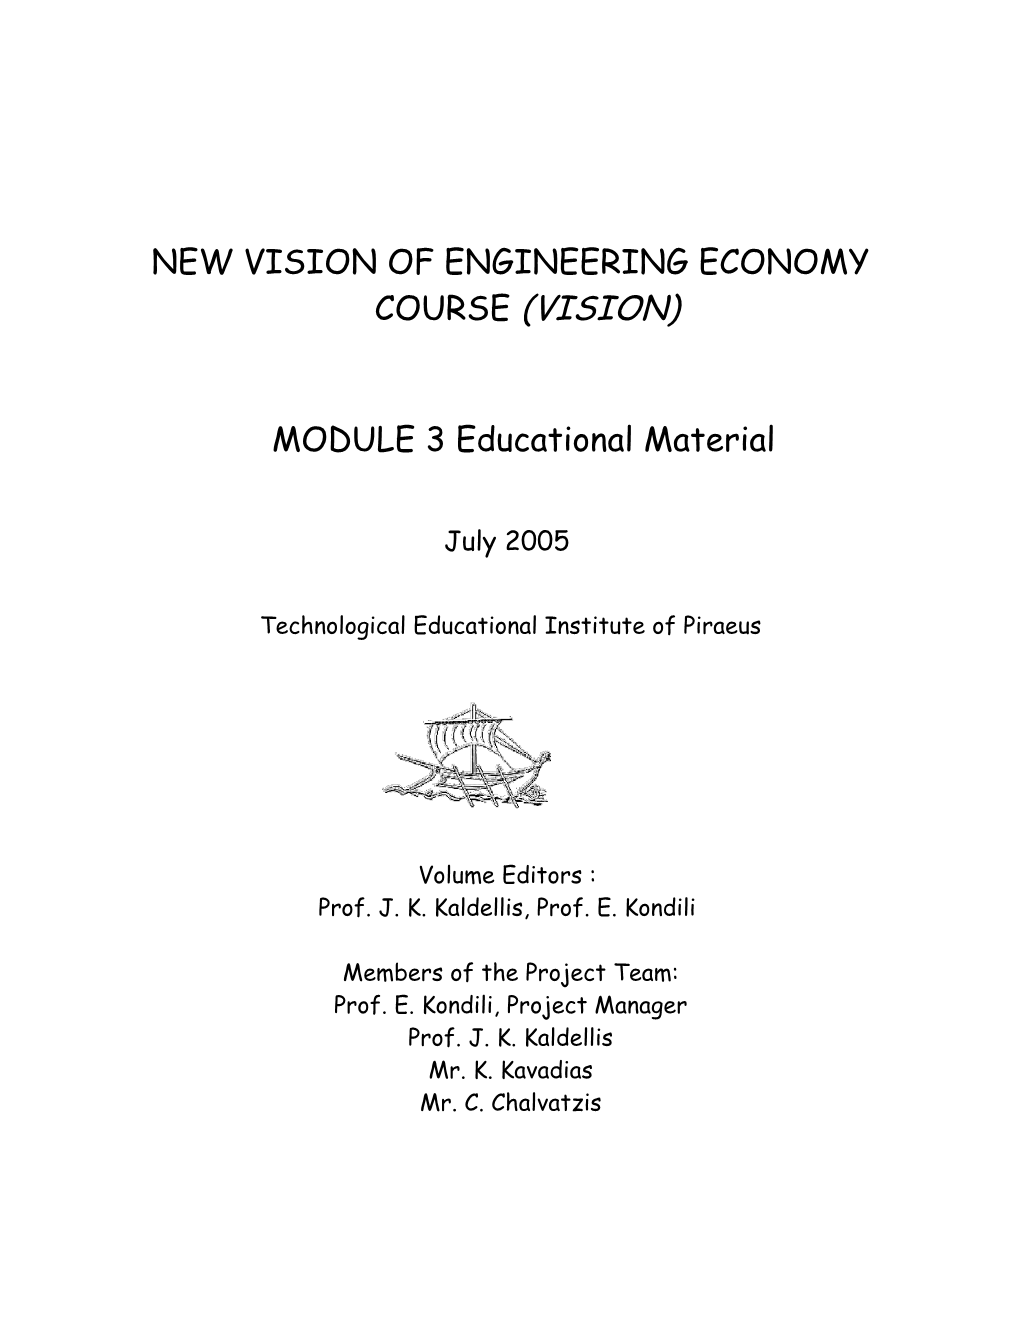 New Vision of Engineering Economy Course (Vision)